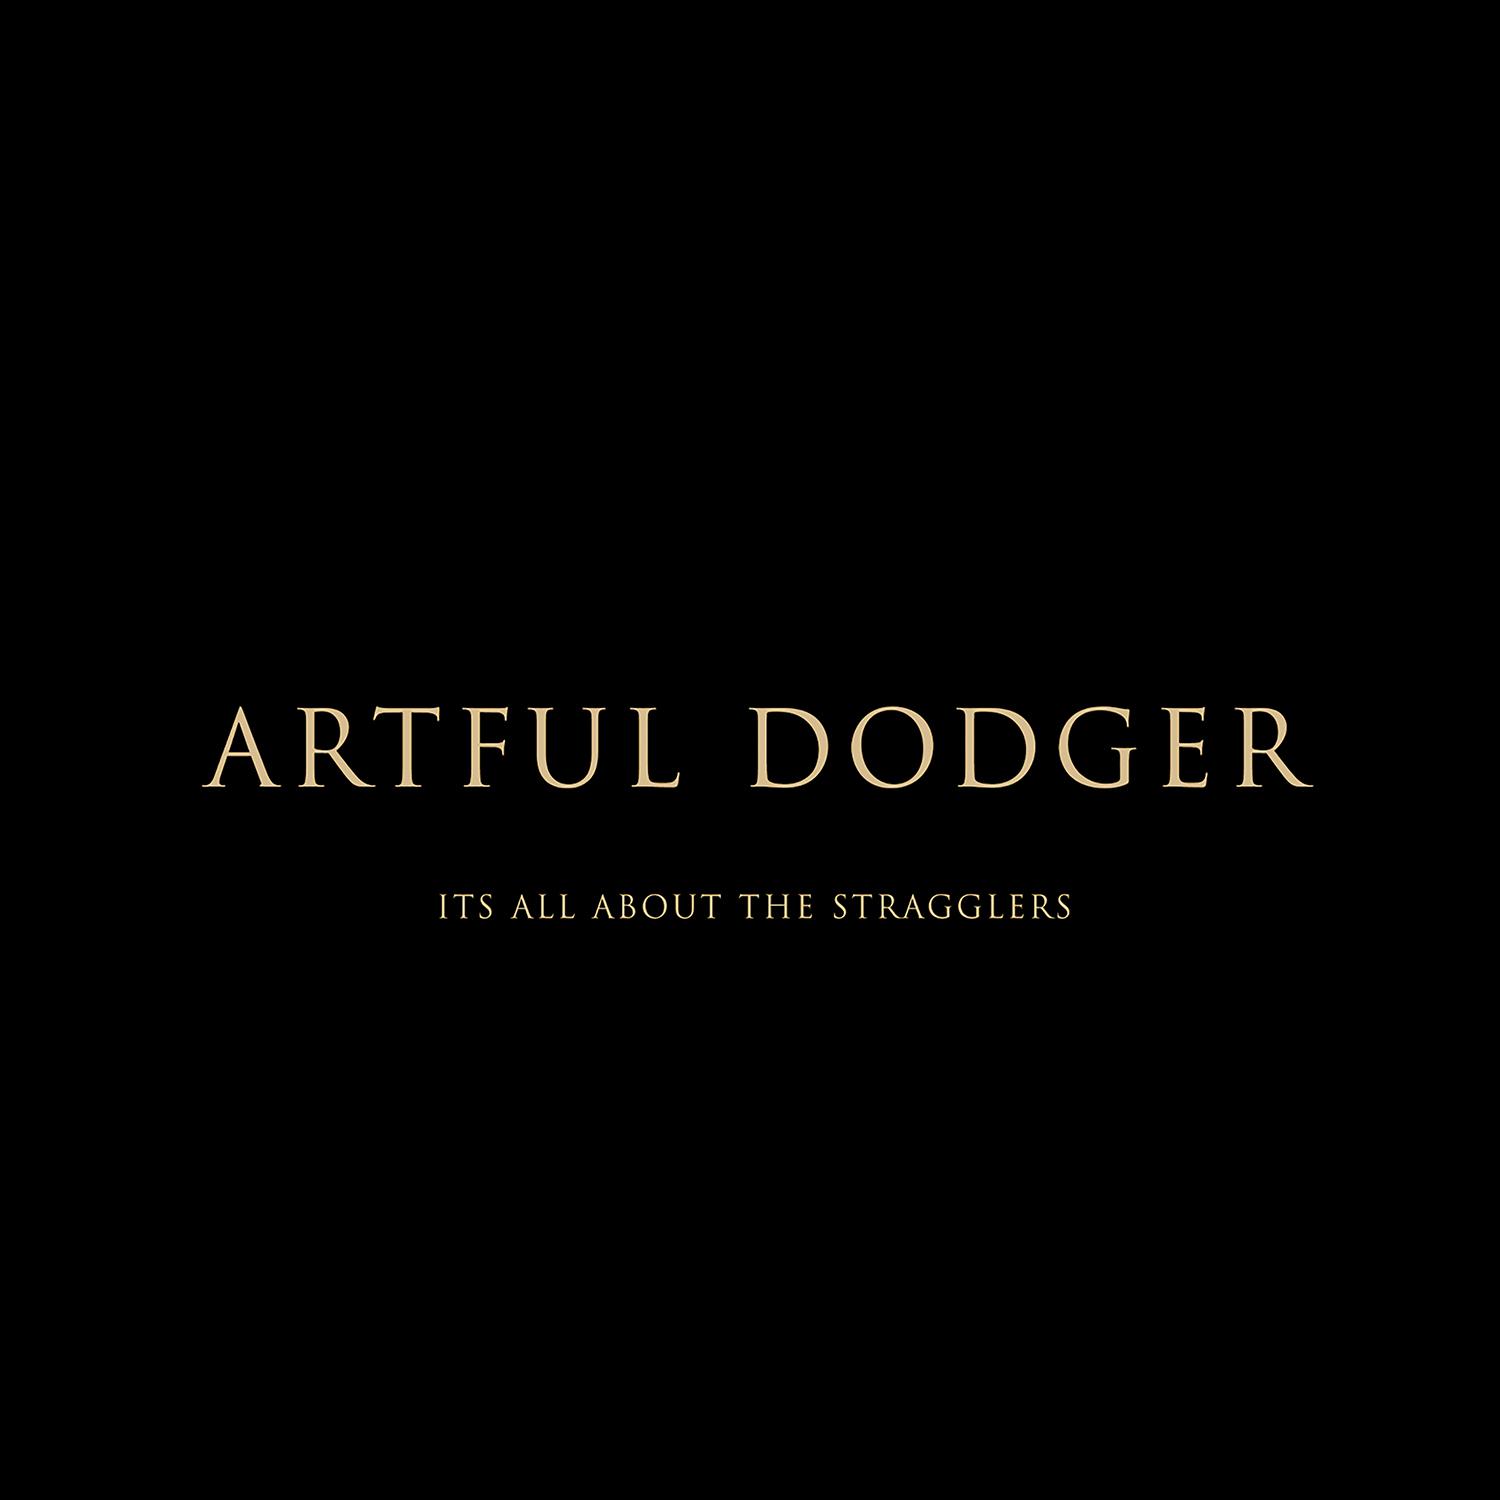 Artful Dodger - Think About Me (feat. Michelle Escoffery)